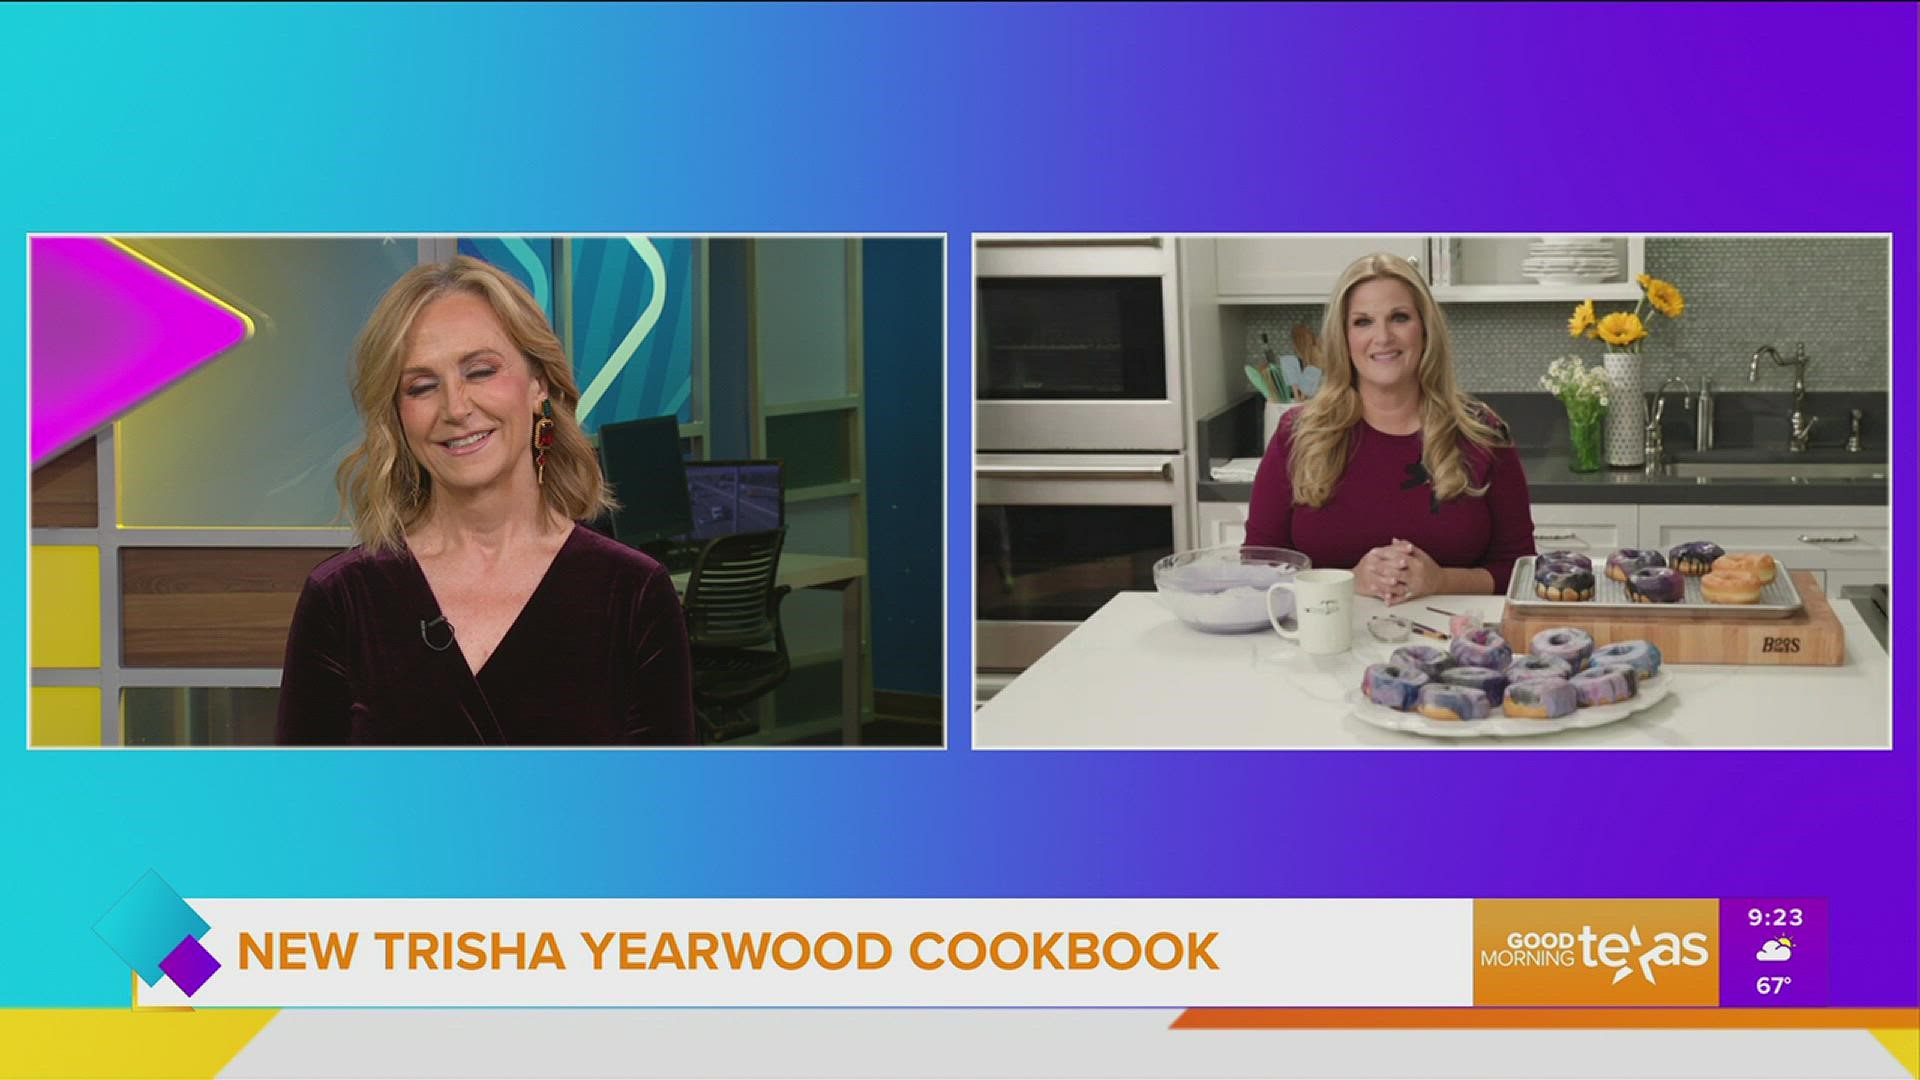 Country music singer Trisha Yearwood talks about her new cookbook and virtual event